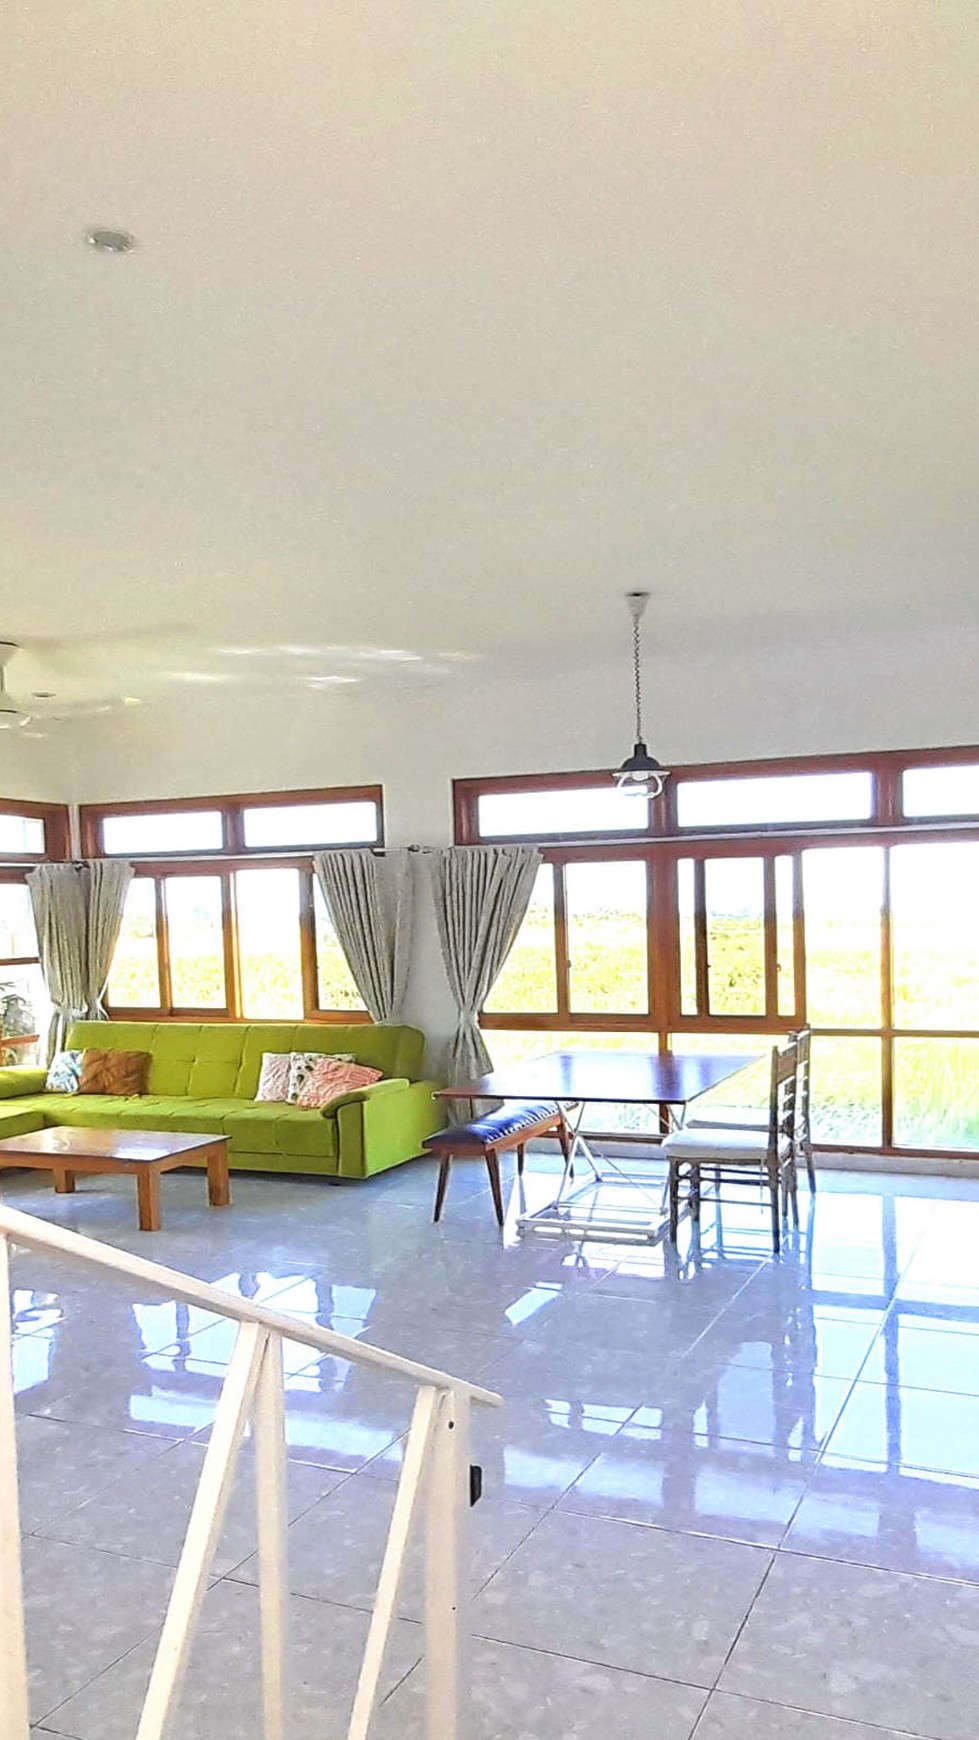 A Beautiful 4 Bedroom Villa Close to Sanur with Stunning Views of Rice Fields and Ocean 